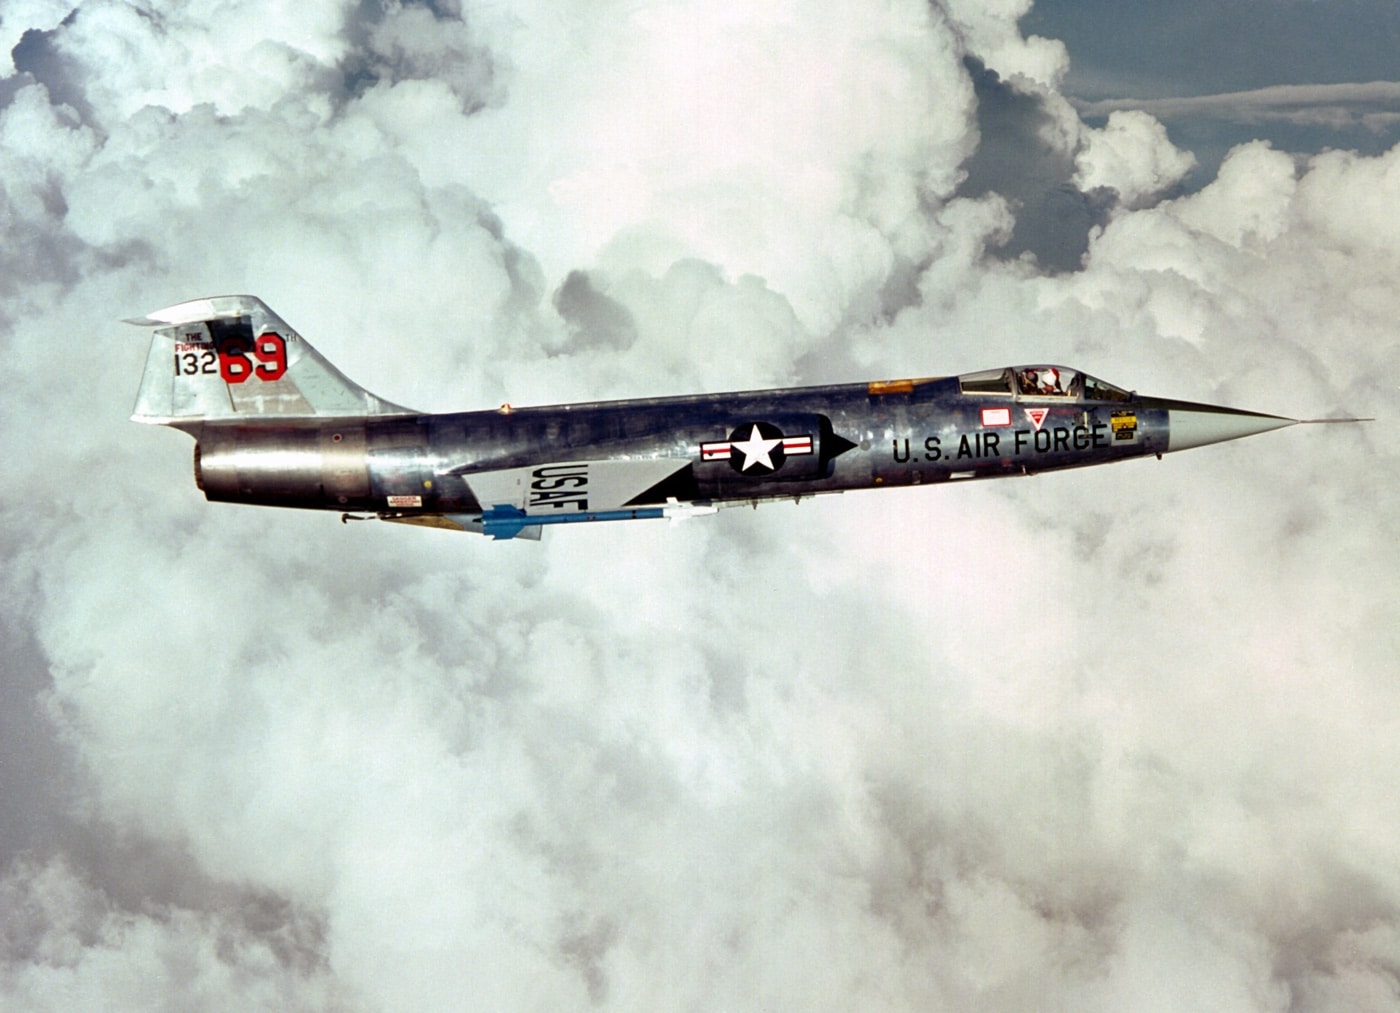 In this photograph, we see a United States Air Force F-104 equipped with a Vulcan cannon, J65 engine (a turbojet engine) and an ejection seat. The top speed and altitude of these aircraft were classified but its low speed performance was all too well known. The F-104 began service in the U.S. but was exported to allied countries around the world. It also served in the Air National Guard.